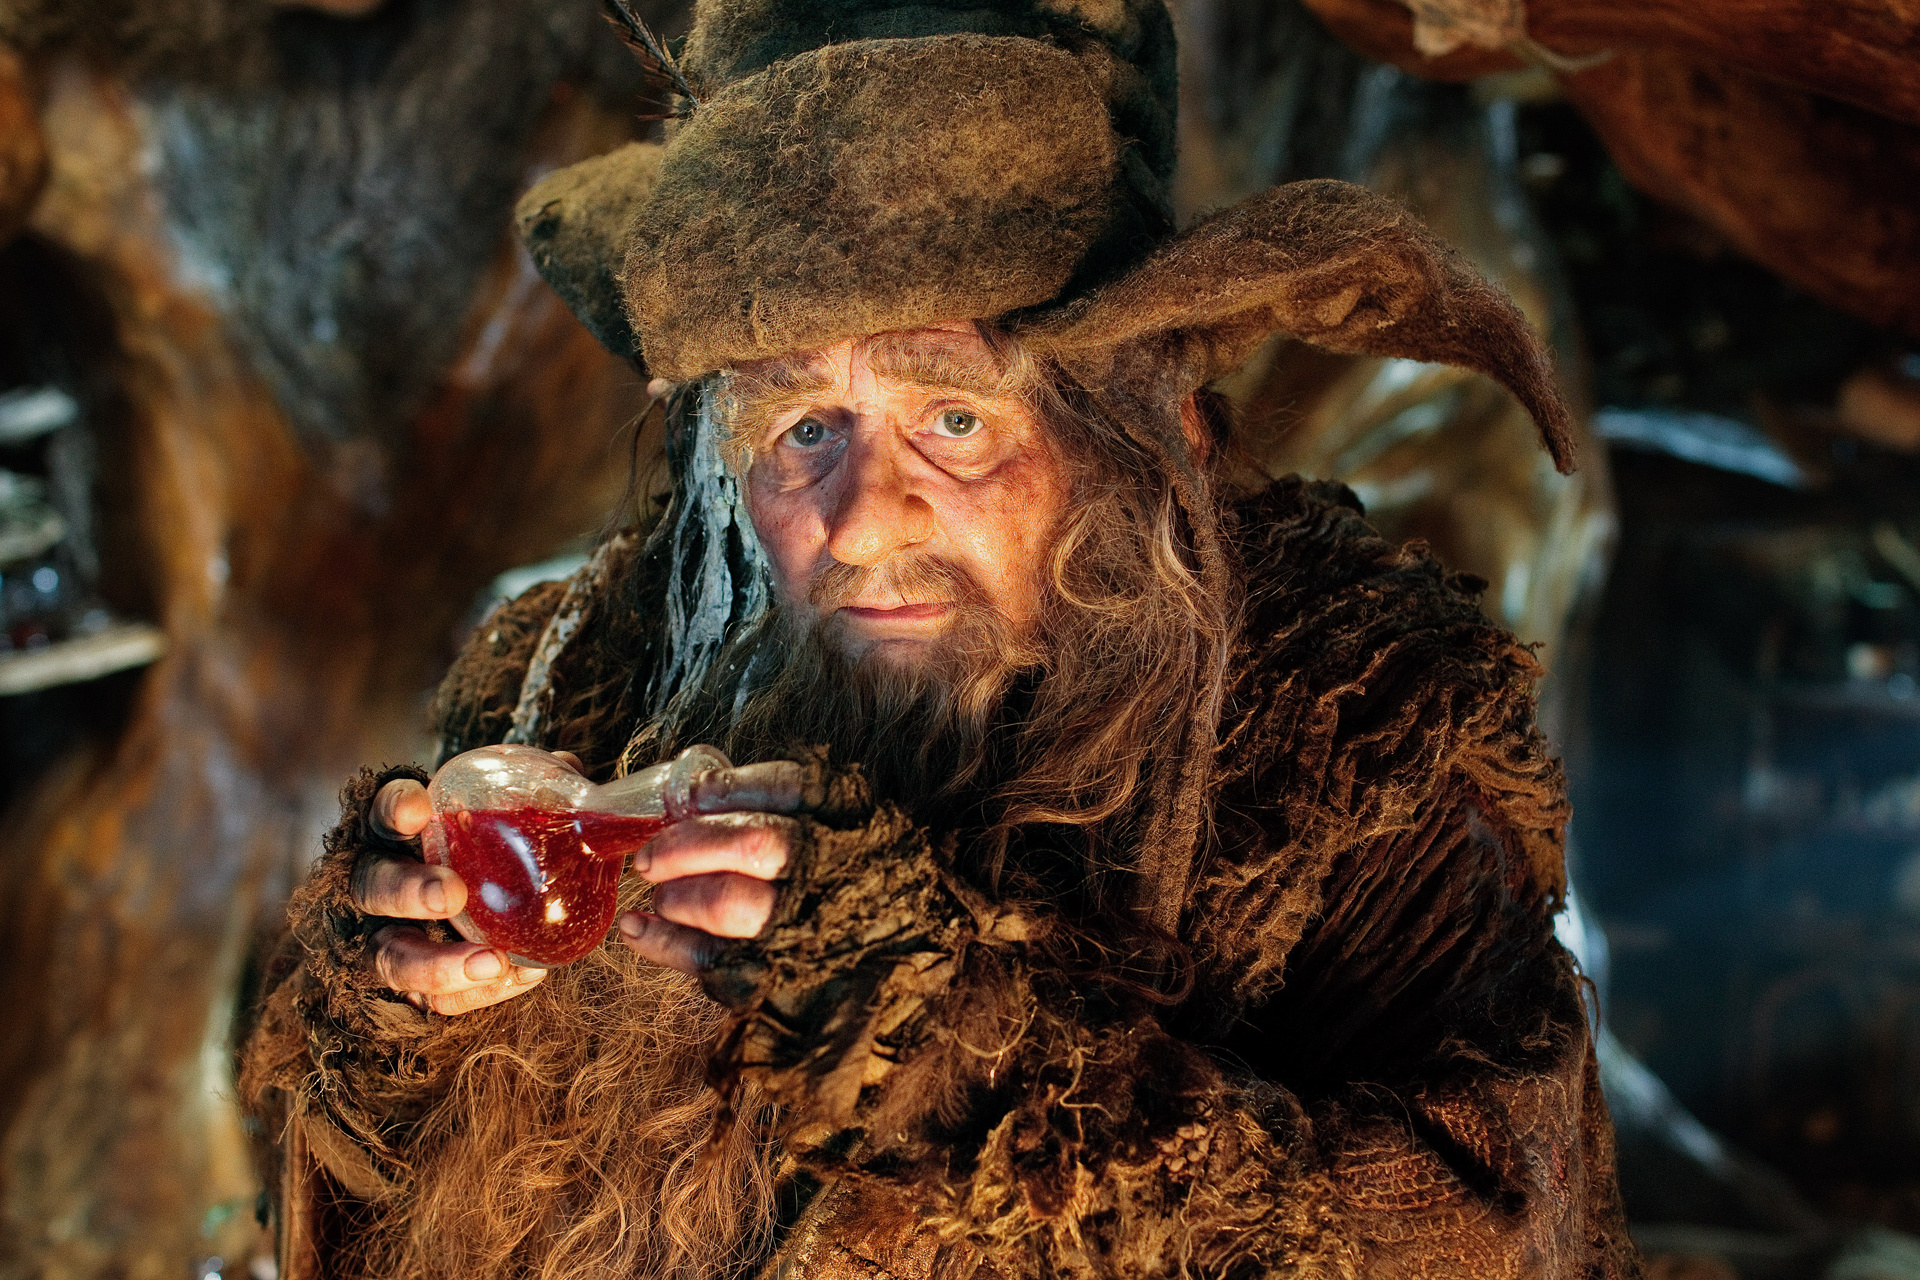 The Hobbit: Desolation of Smaug wallpaper, Radagast the Brown, Mysterious and wise, Magical world, 1920x1280 HD Desktop